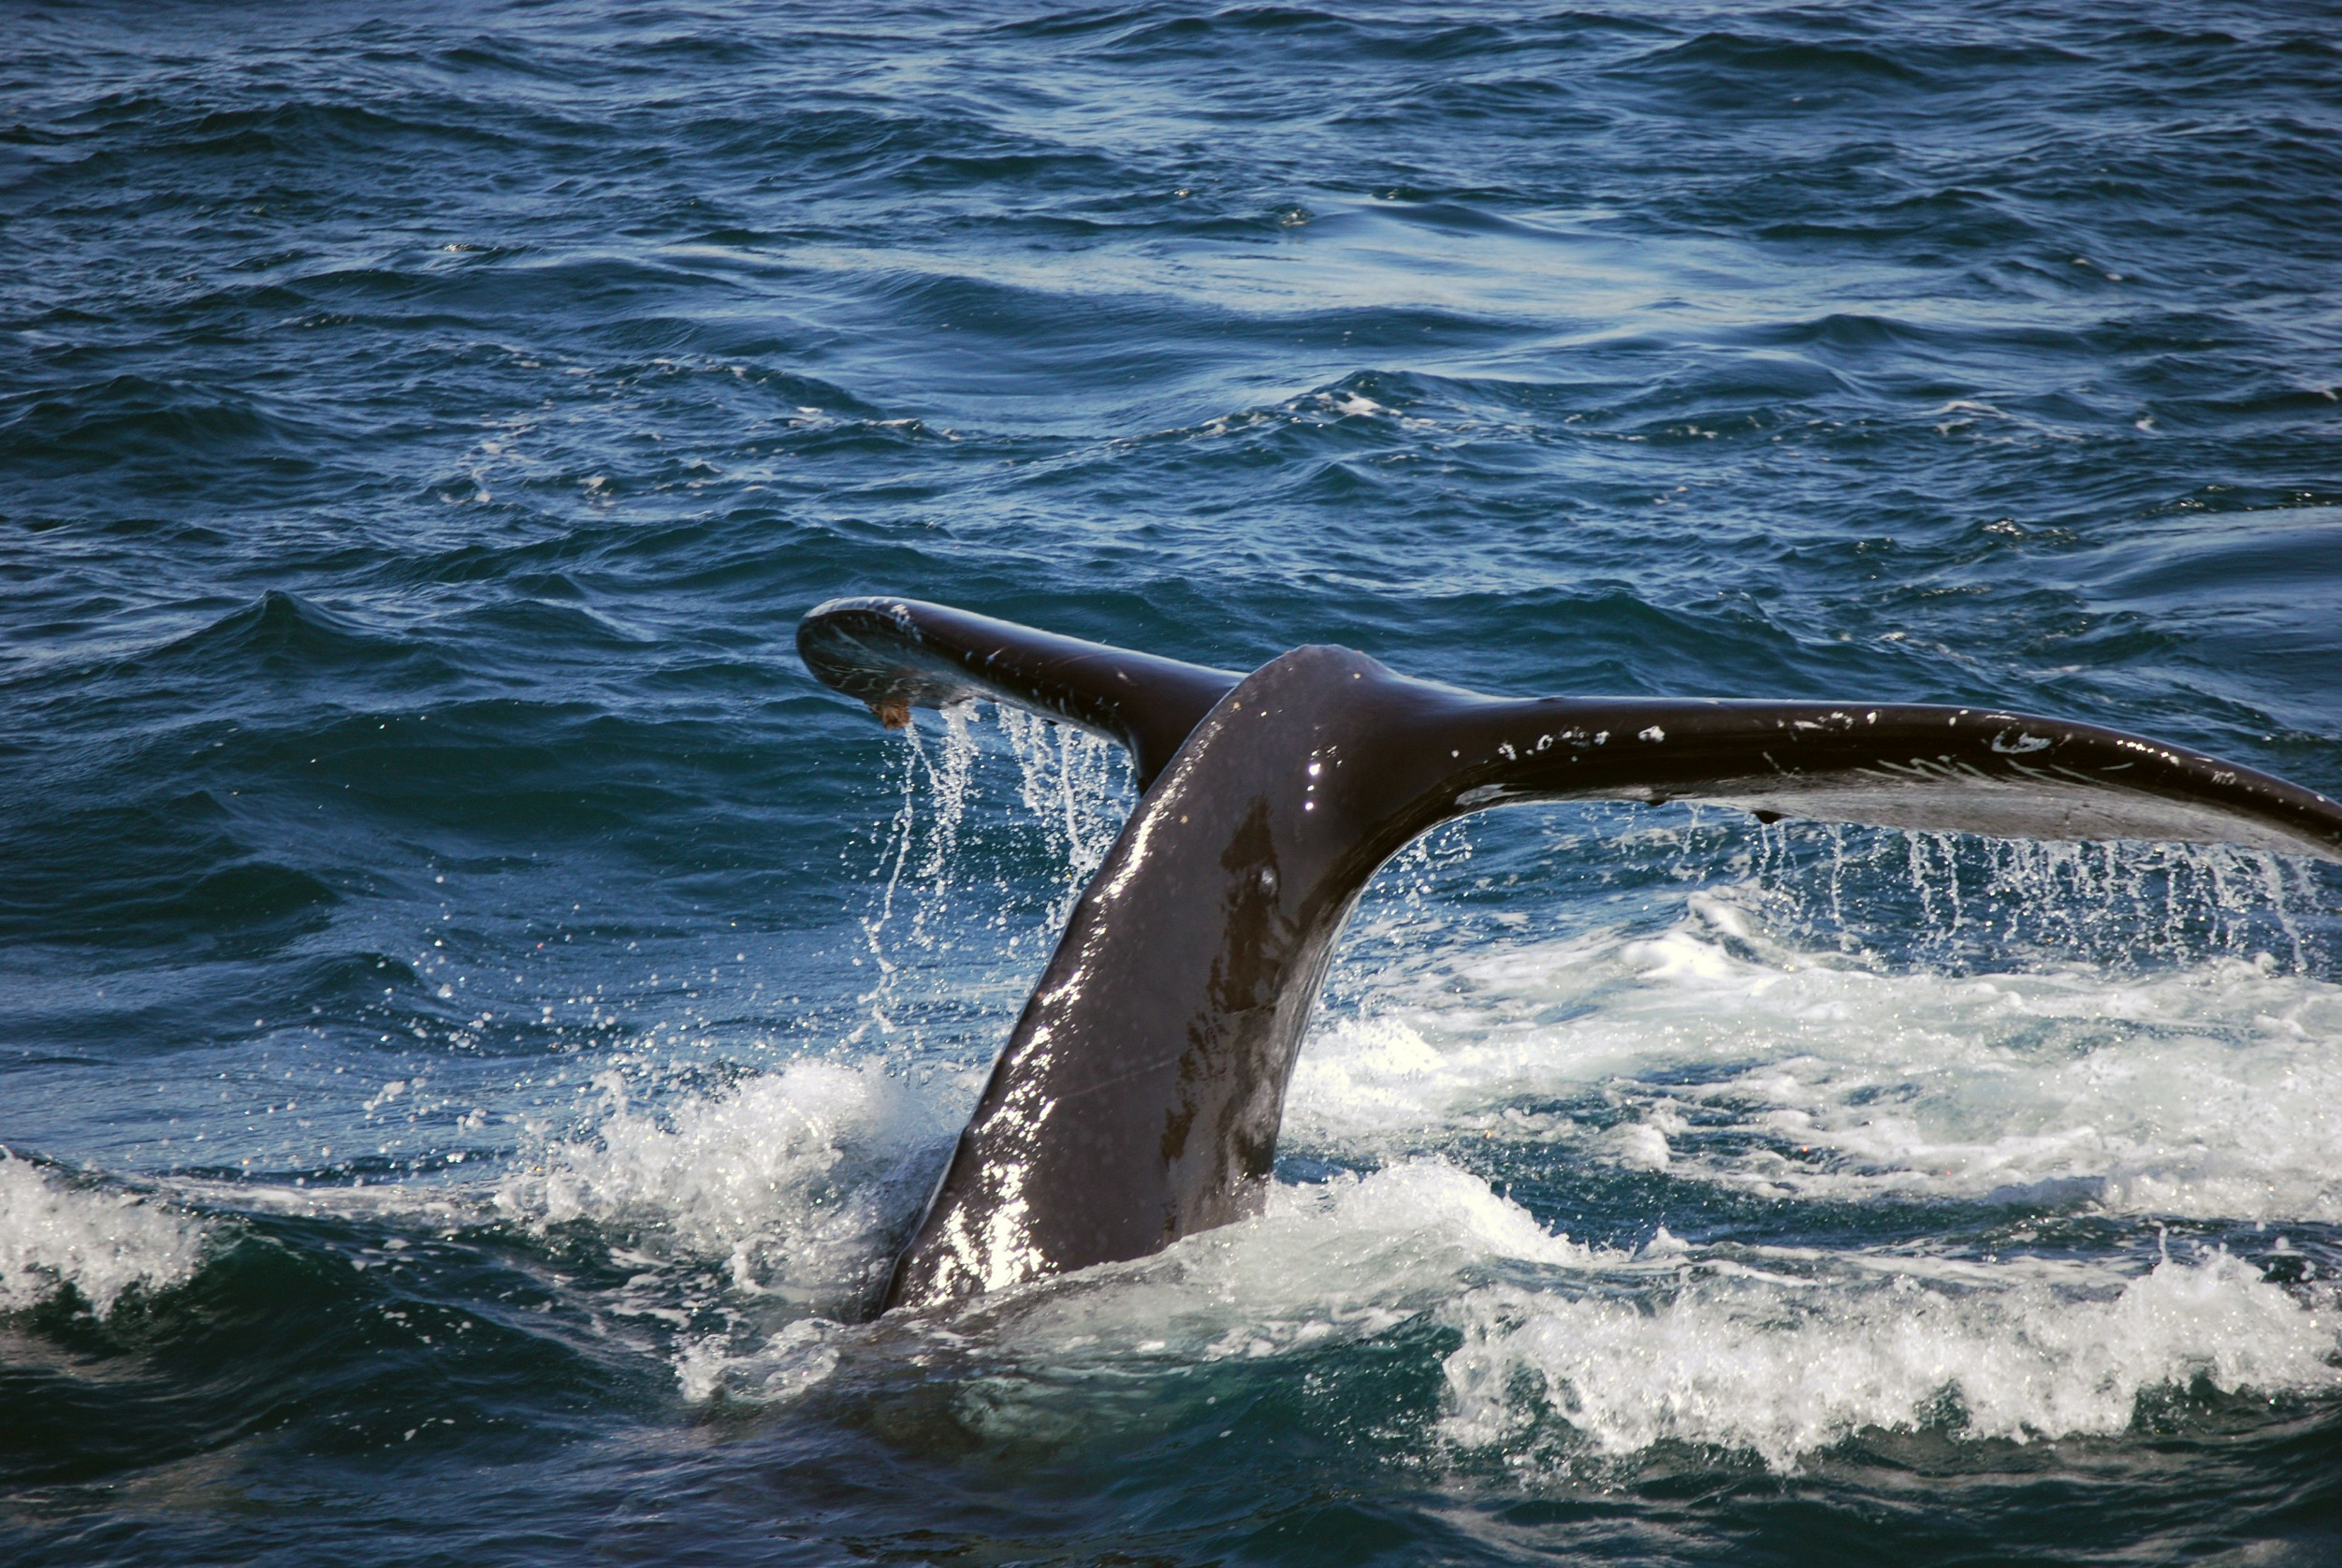 Offshore wind is systematically violating the Marine Mammal Protection Act